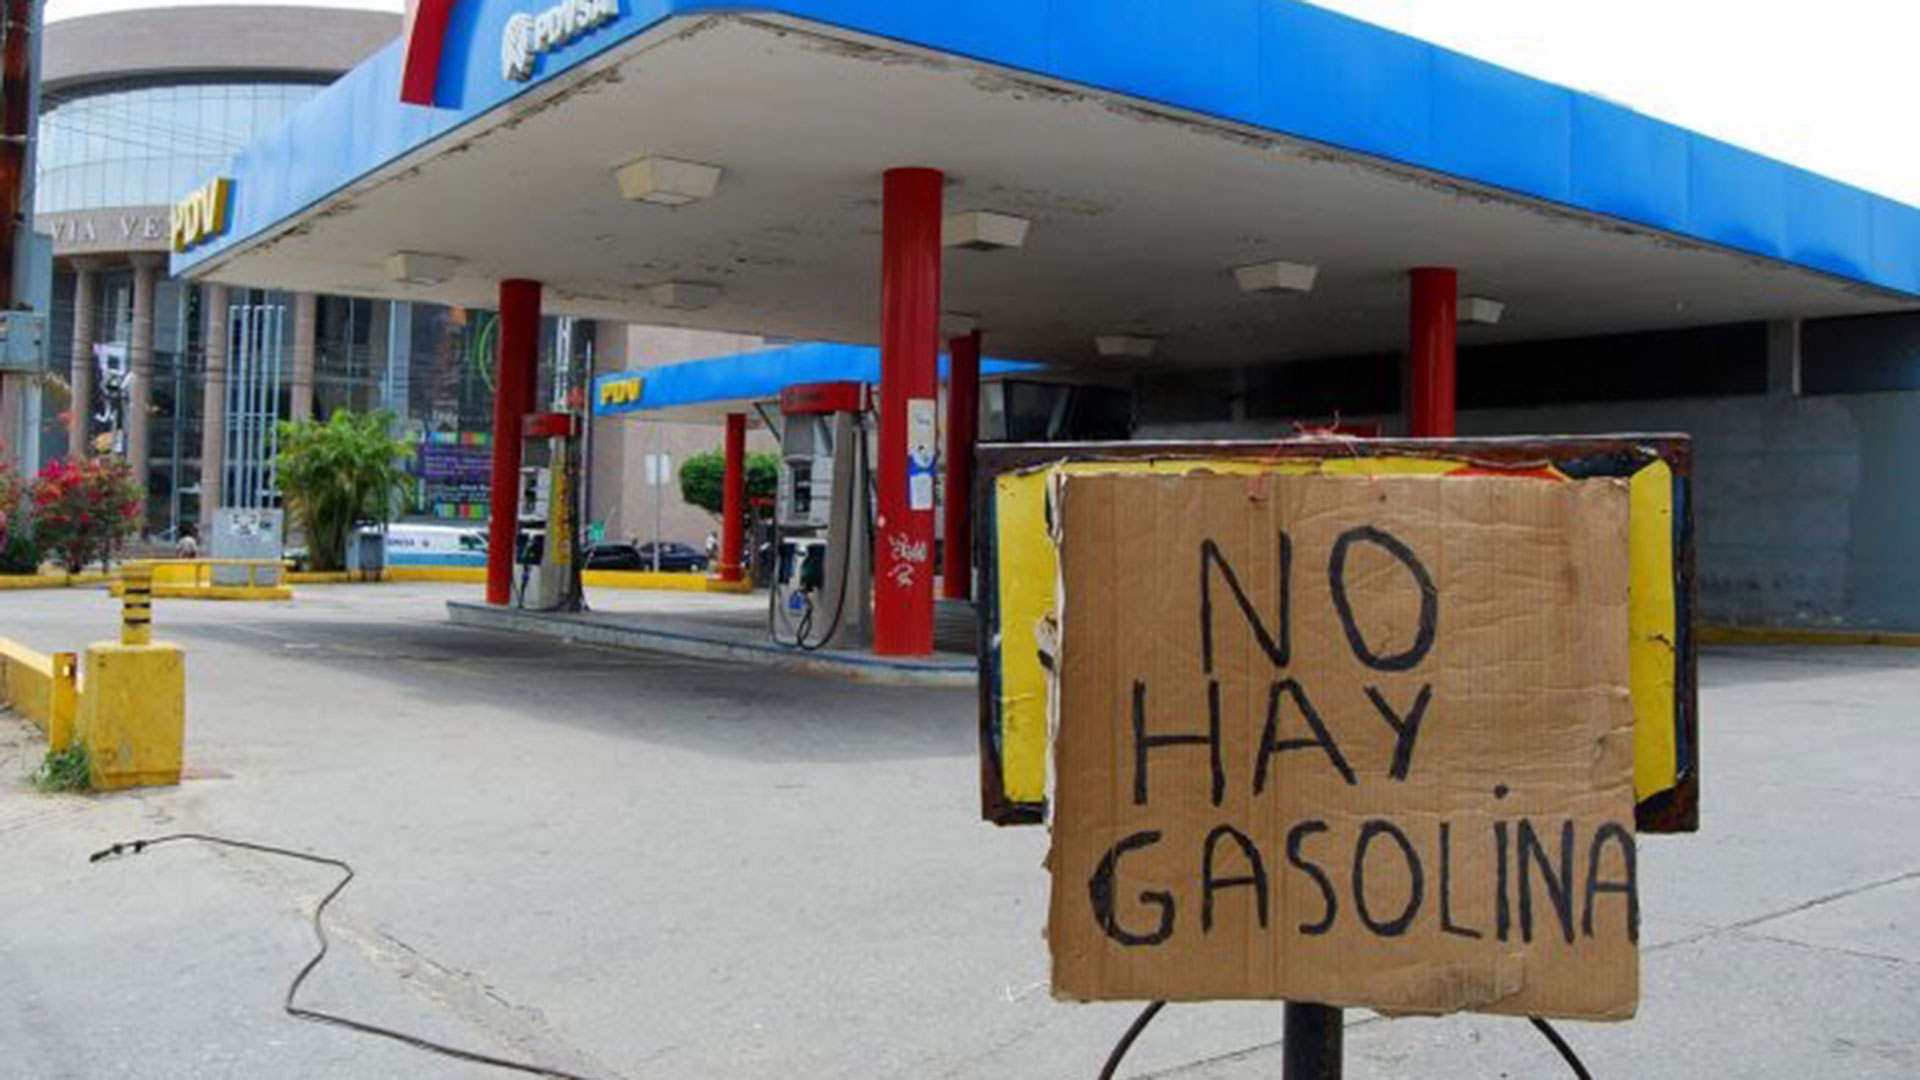 In desperation, the people of Venezuela steal oil to produce their own gasoline